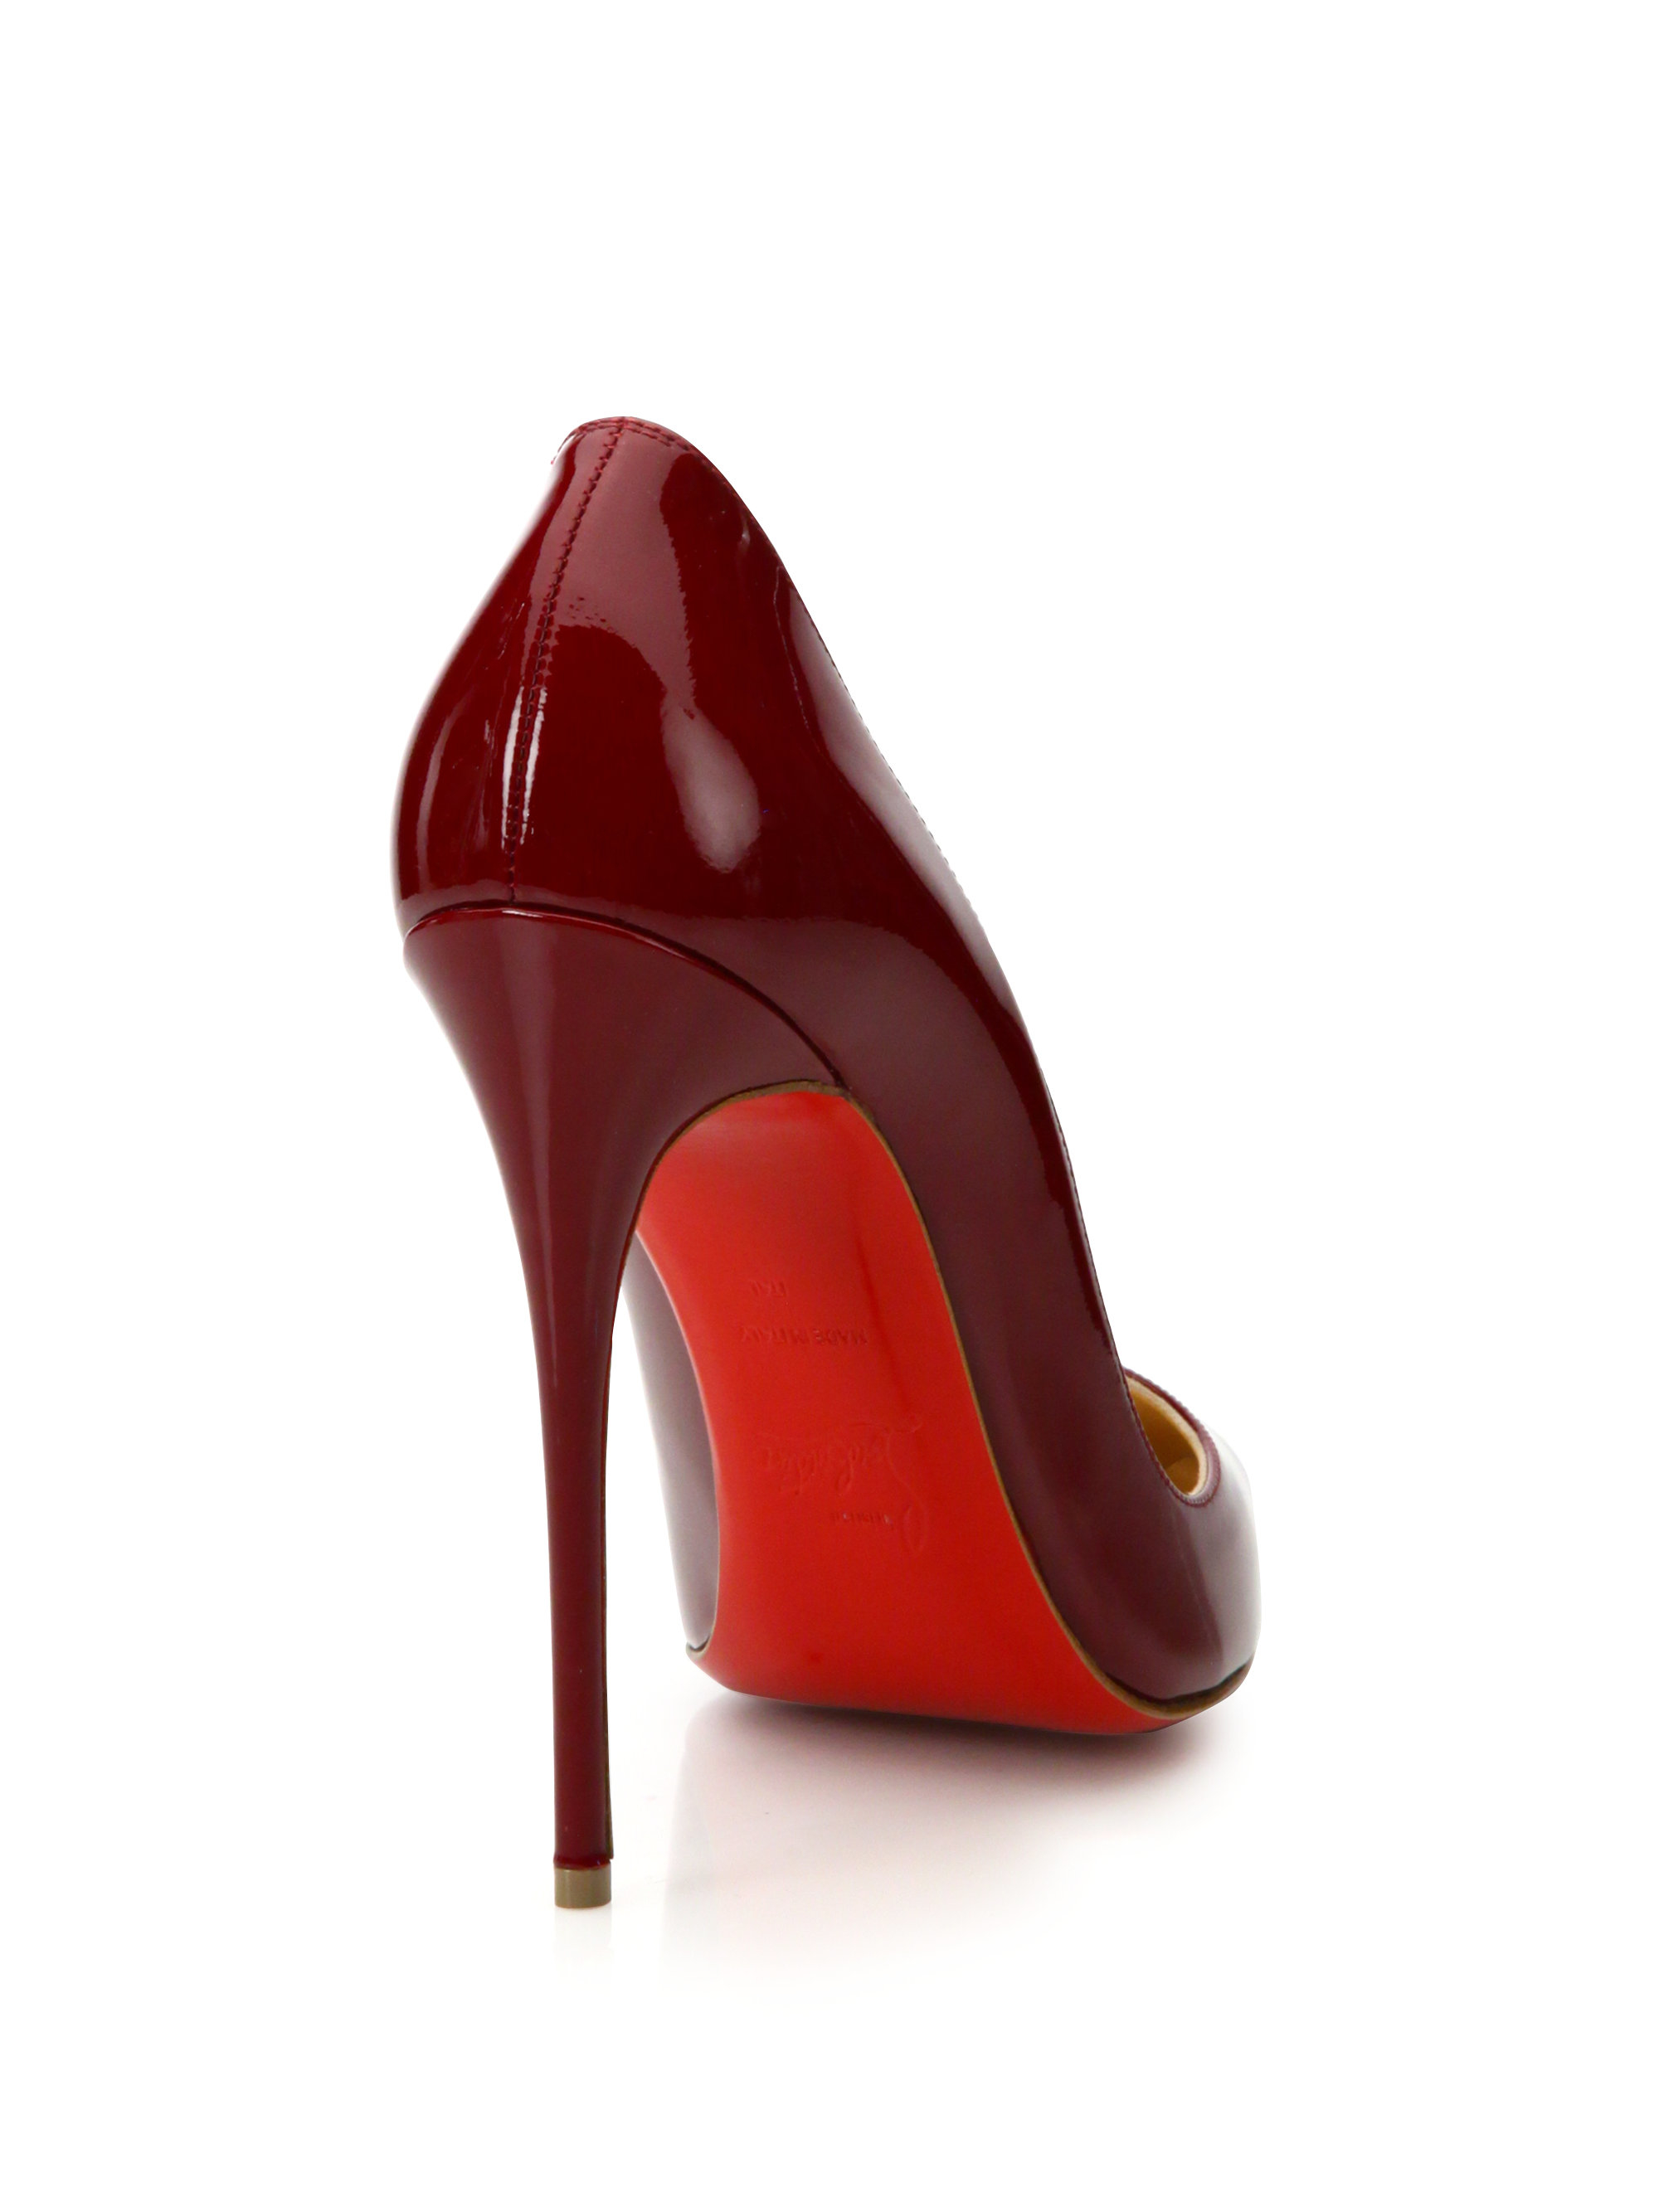 Christian louboutin So Kate Rouge Patent Leather Pumps in Red | Lyst  